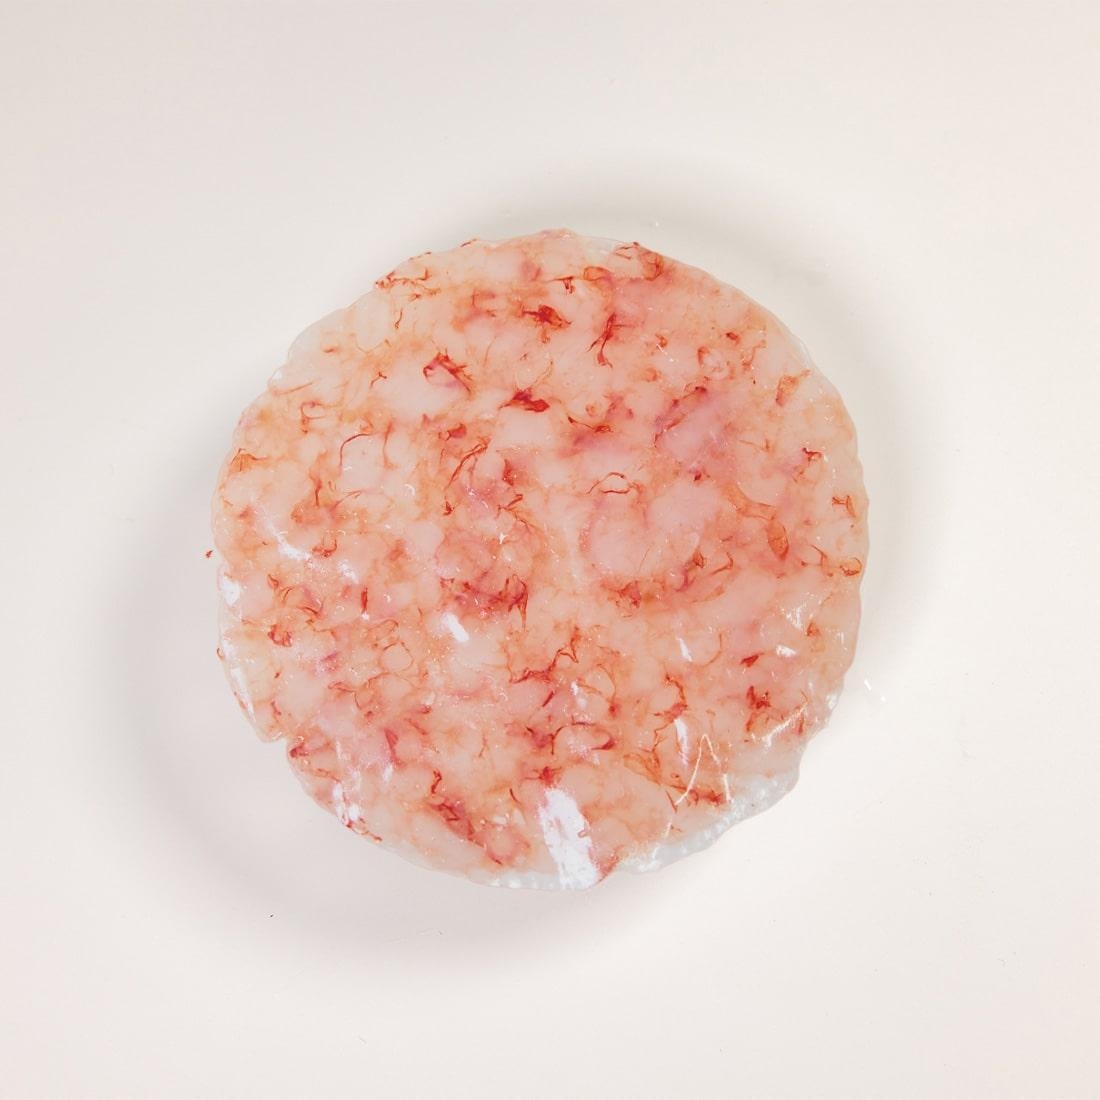 Image 0 of Red King Prawn Carpaccio from Mazara del Vallo, 5 packs of 50g each